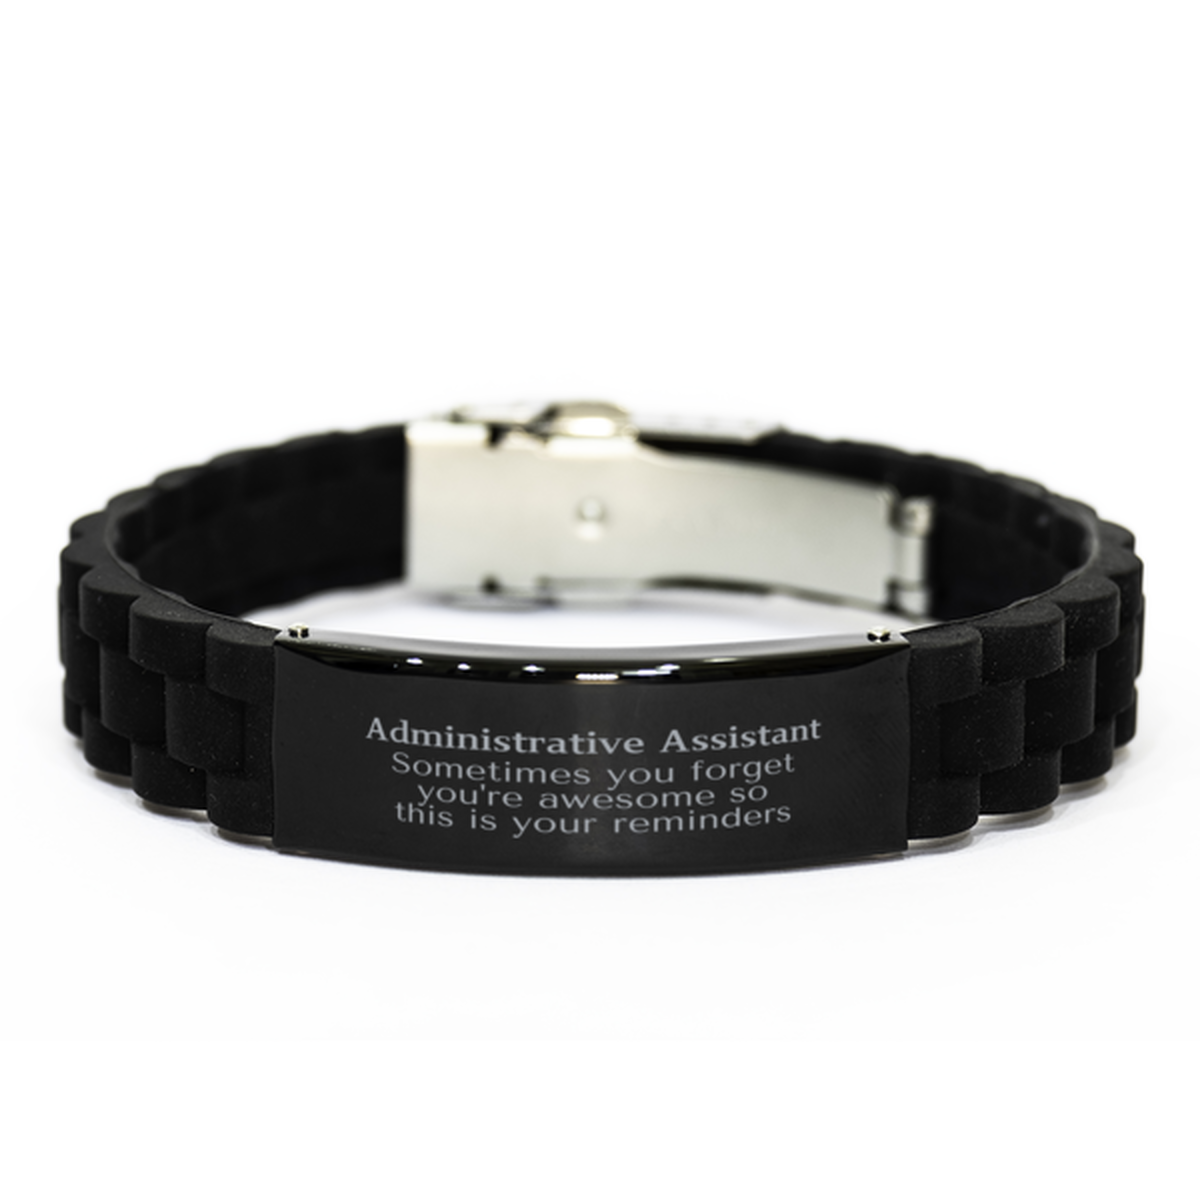 Sentimental Administrative Assistant Black Glidelock Clasp Bracelet, Administrative Assistant Sometimes you forget you're awesome so this is your reminders, Graduation Christmas Birthday Gifts for Administrative Assistant, Men, Women, Coworkers